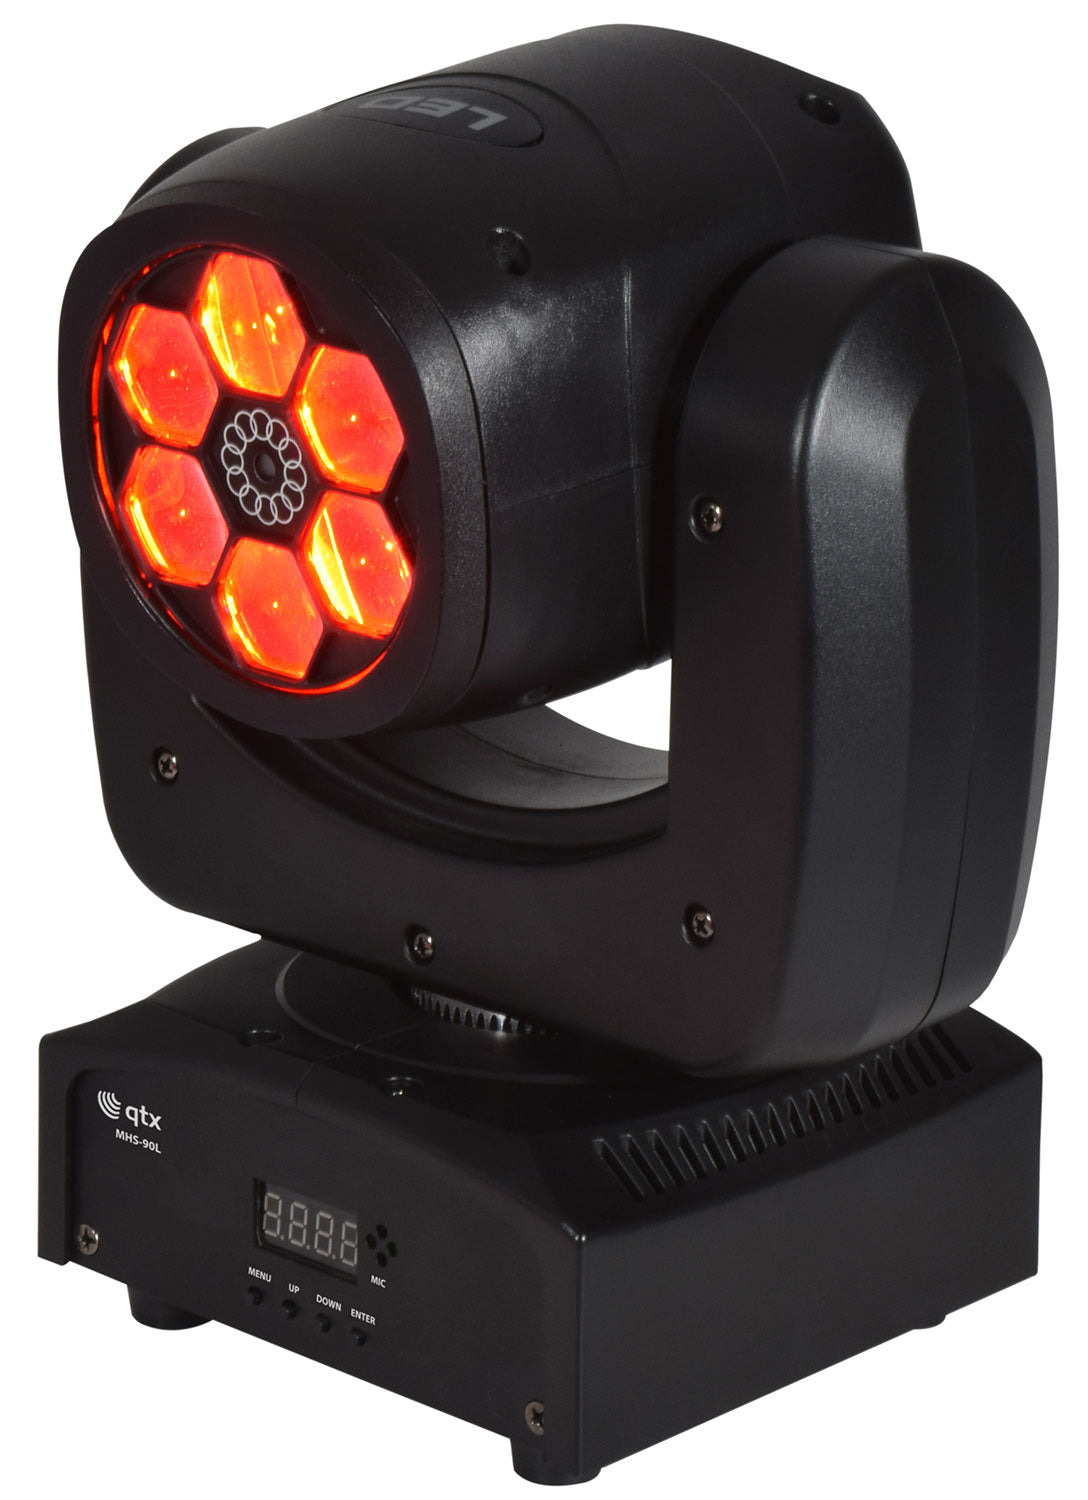 QTX MHS-90L - 90W LED Moving Head with Laser (150458)